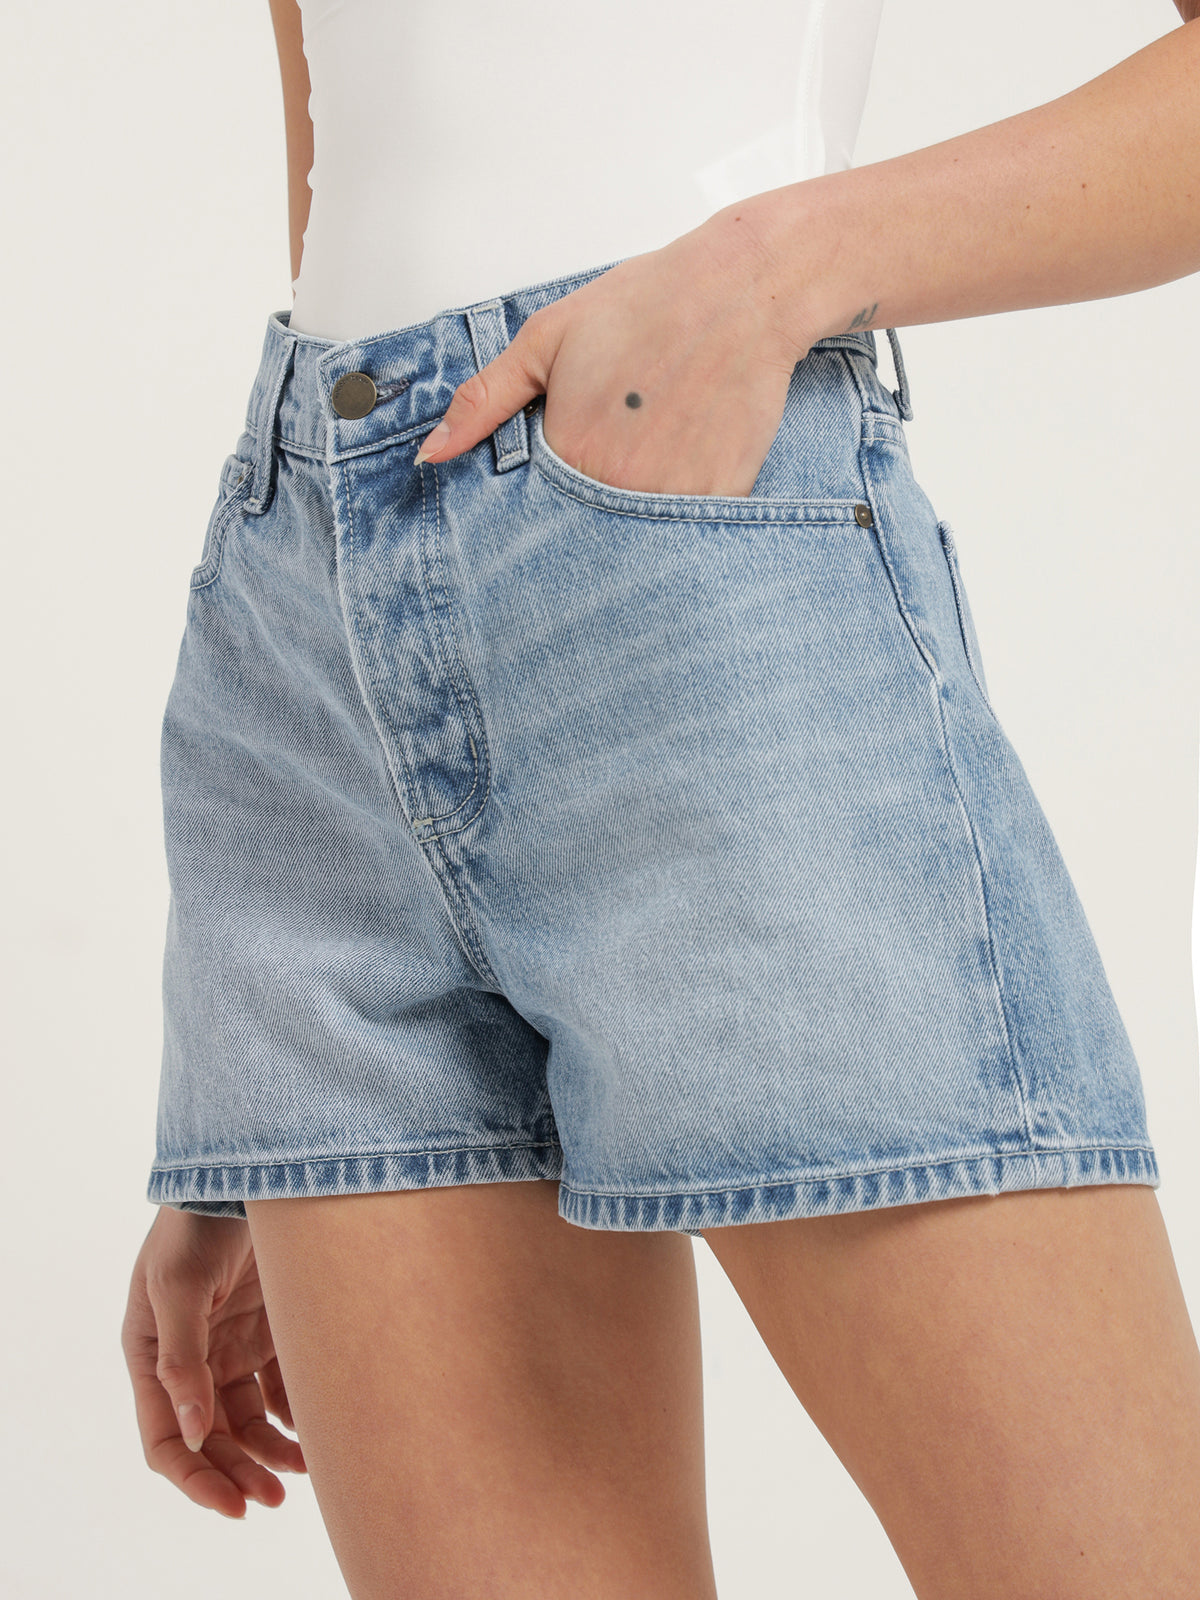 Agnes Shorts in Captivating Blue